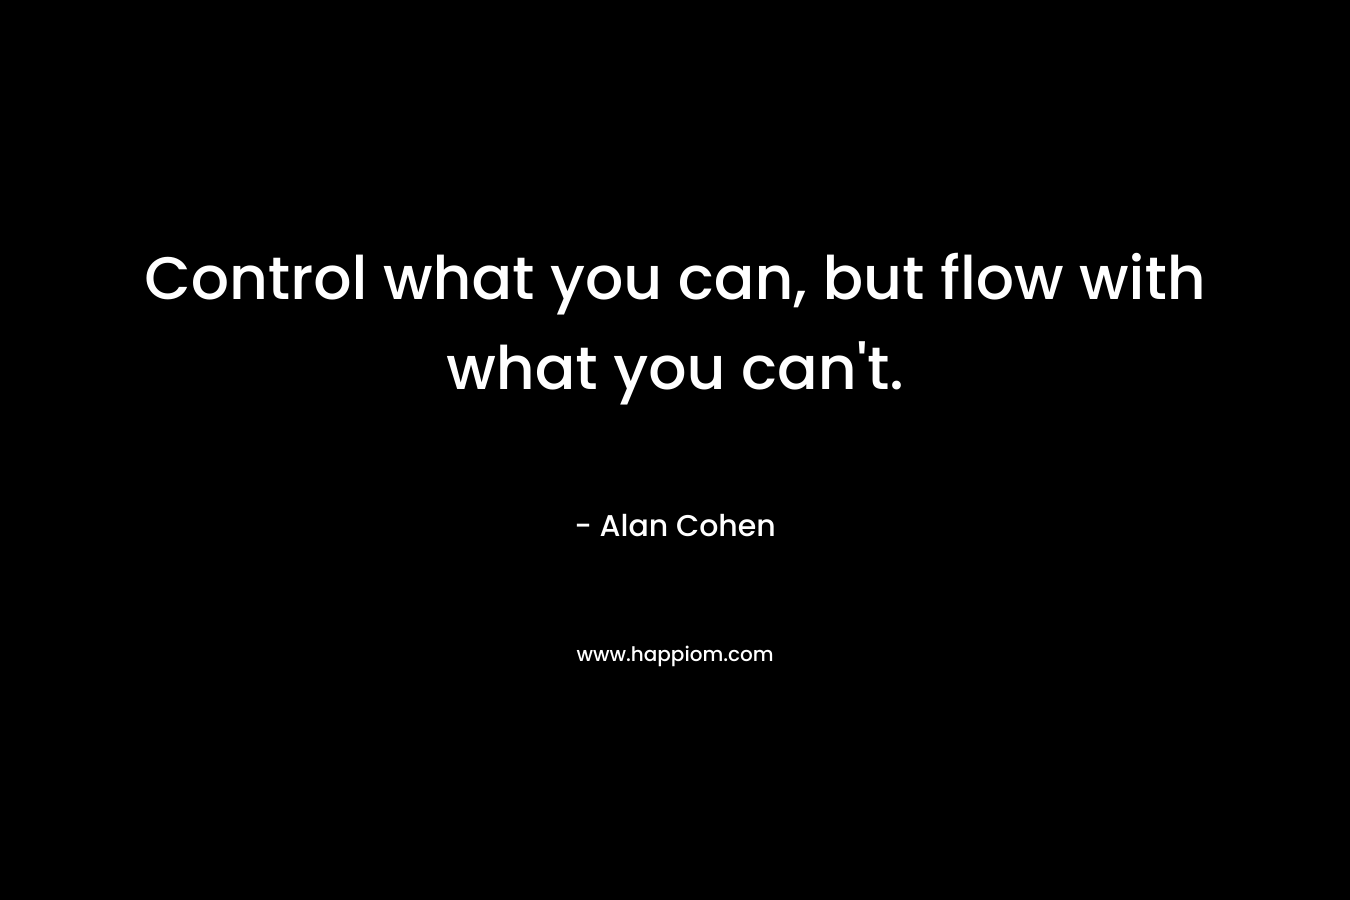 Control what you can, but flow with what you can’t. – Alan Cohen